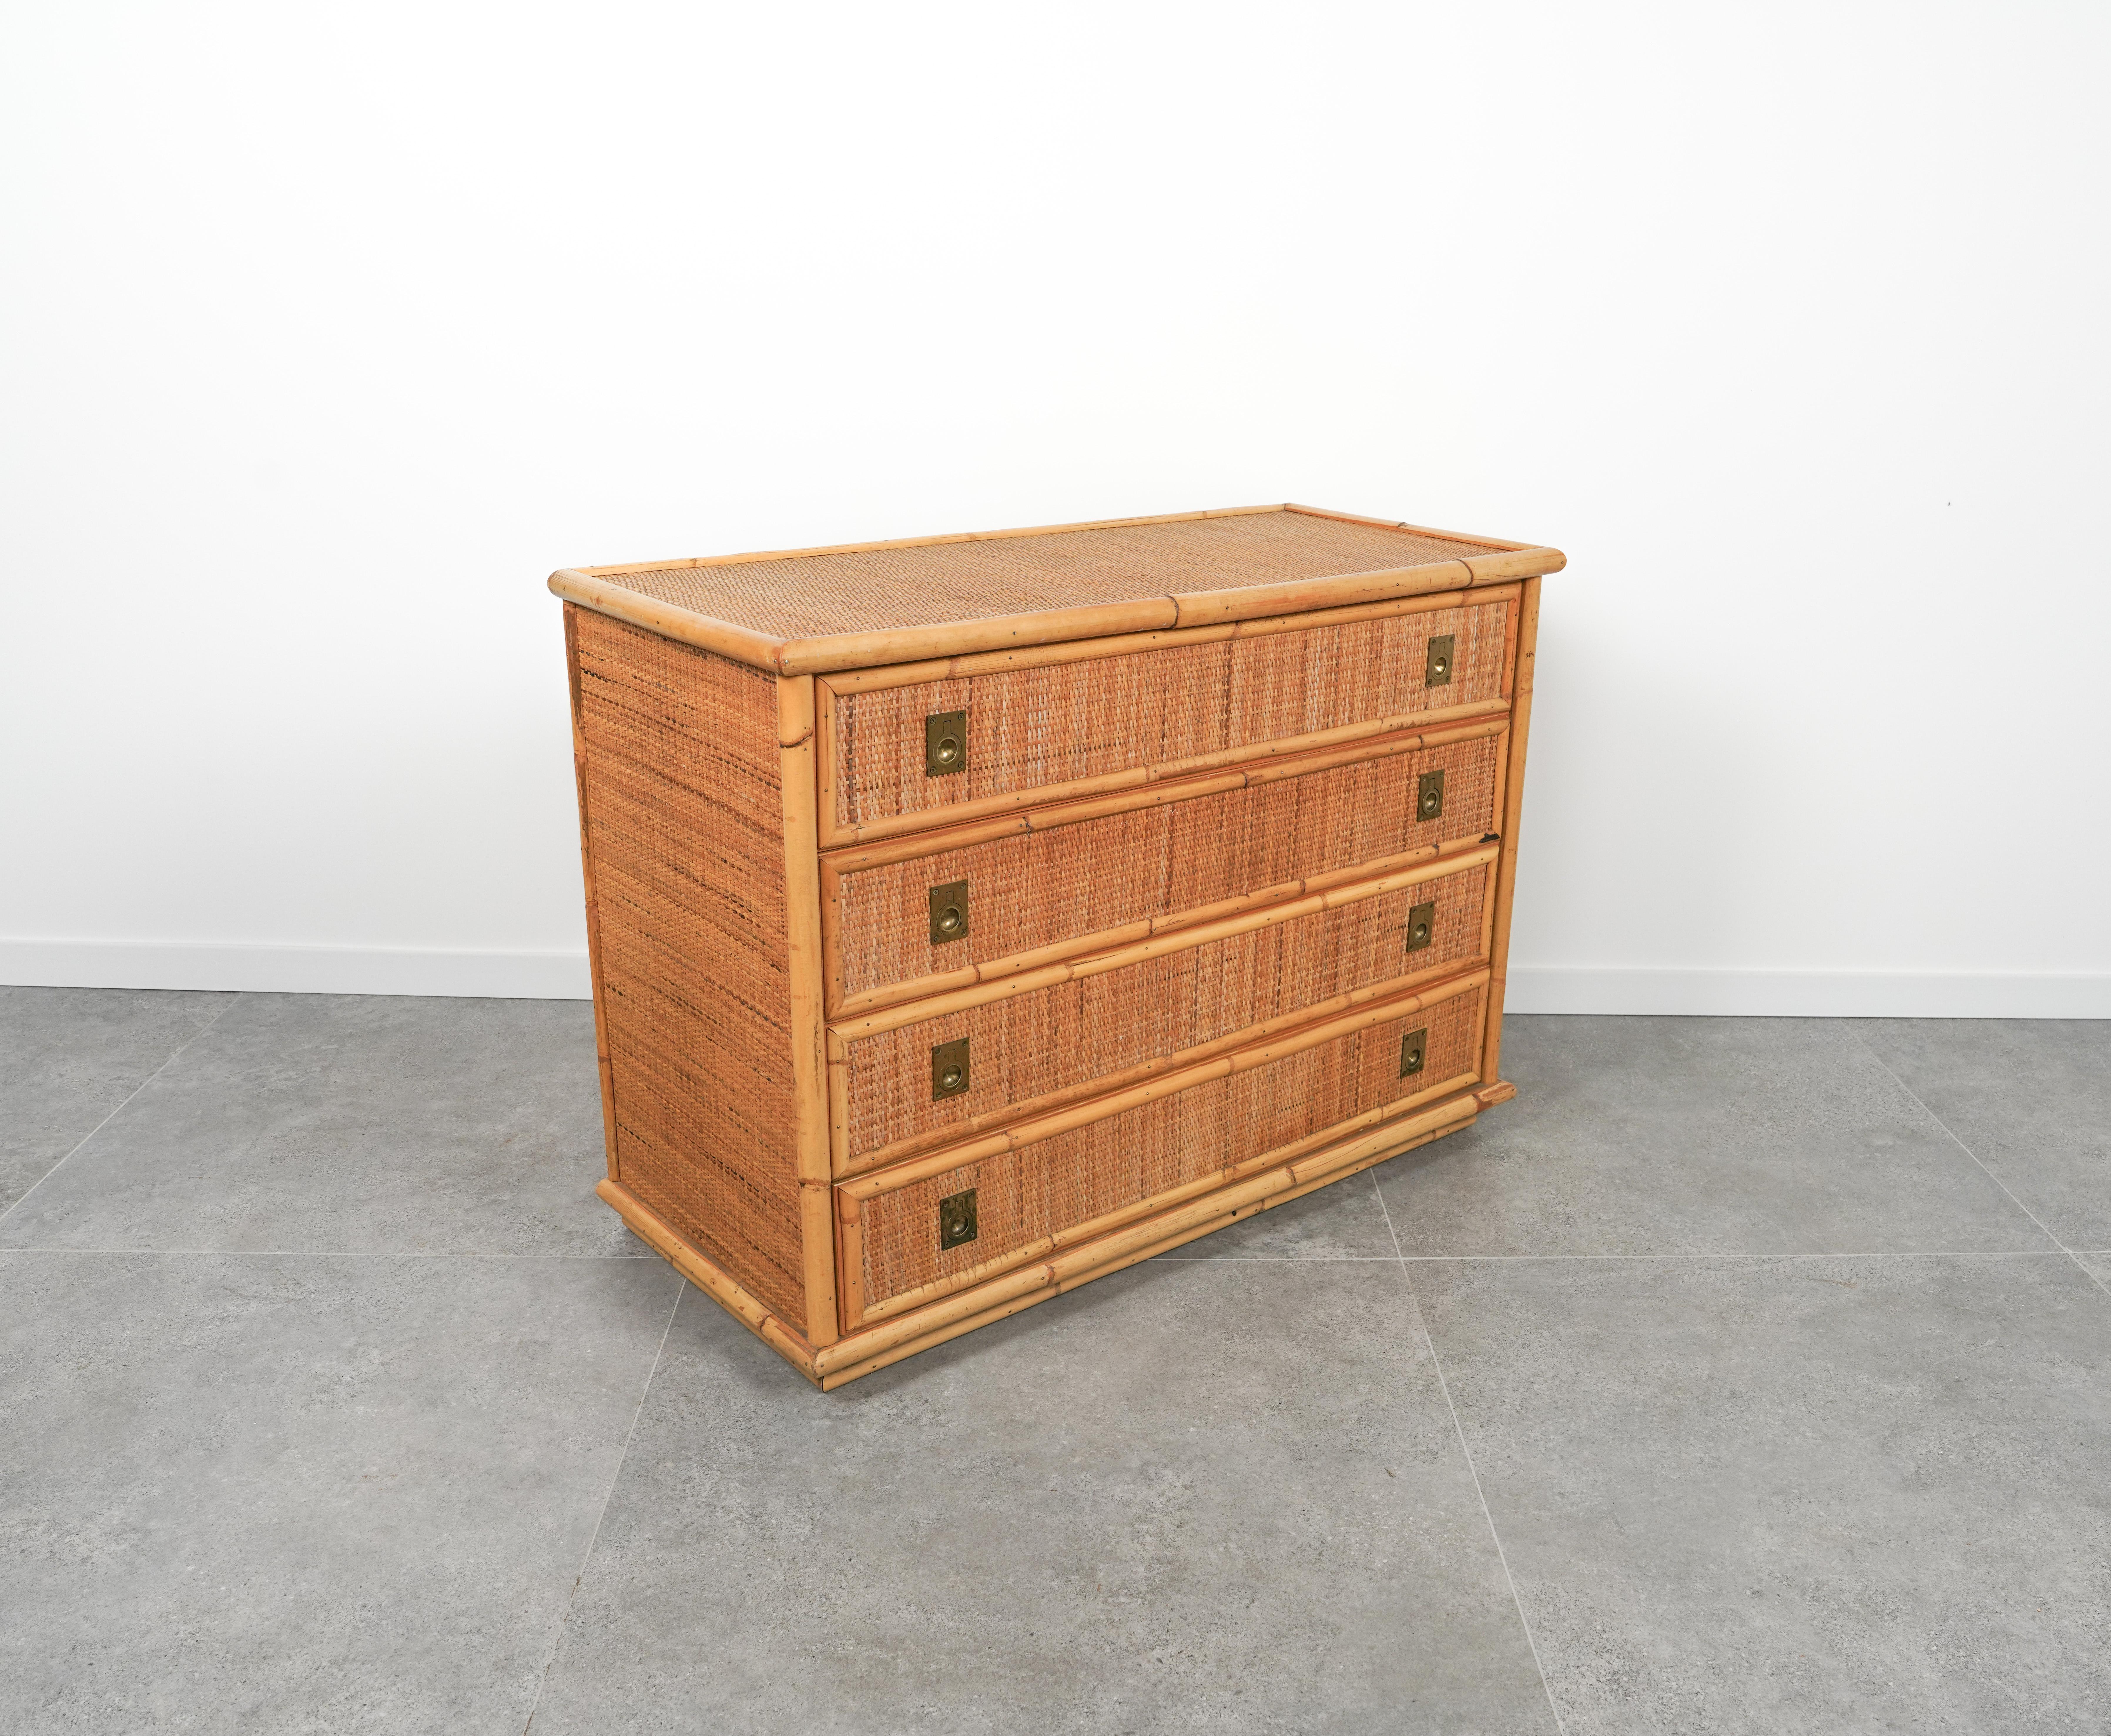 Midcentury Bamboo, Rattan and Brass Chest of Drawers by Dal Vera, Italy, 1970s For Sale 4